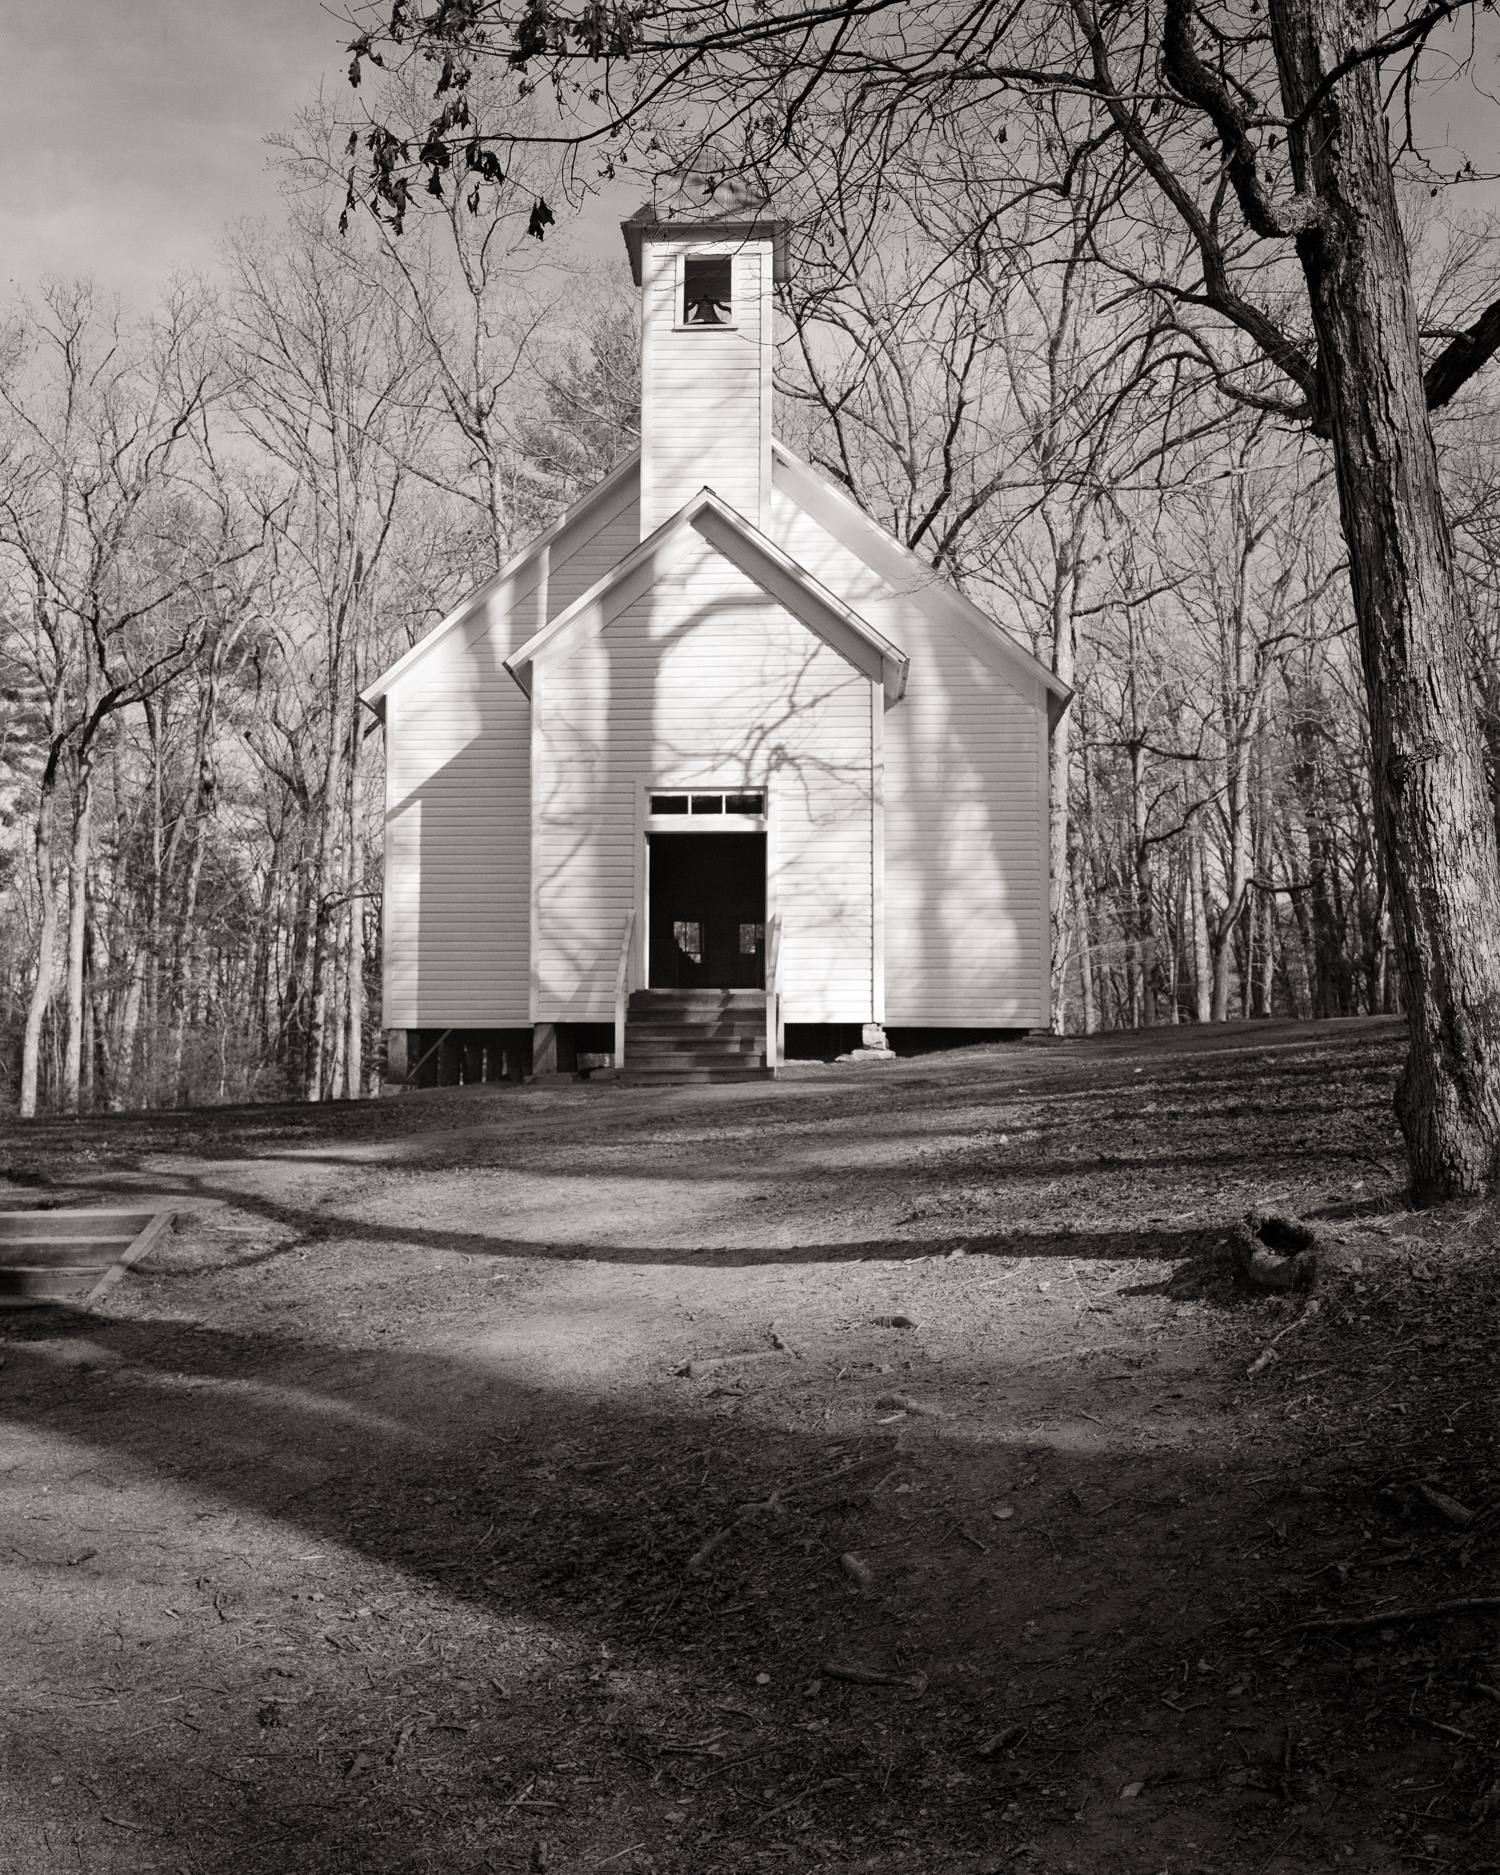 Shadows of the surrounding forest become one with a quaint old church in Cade's Cove.